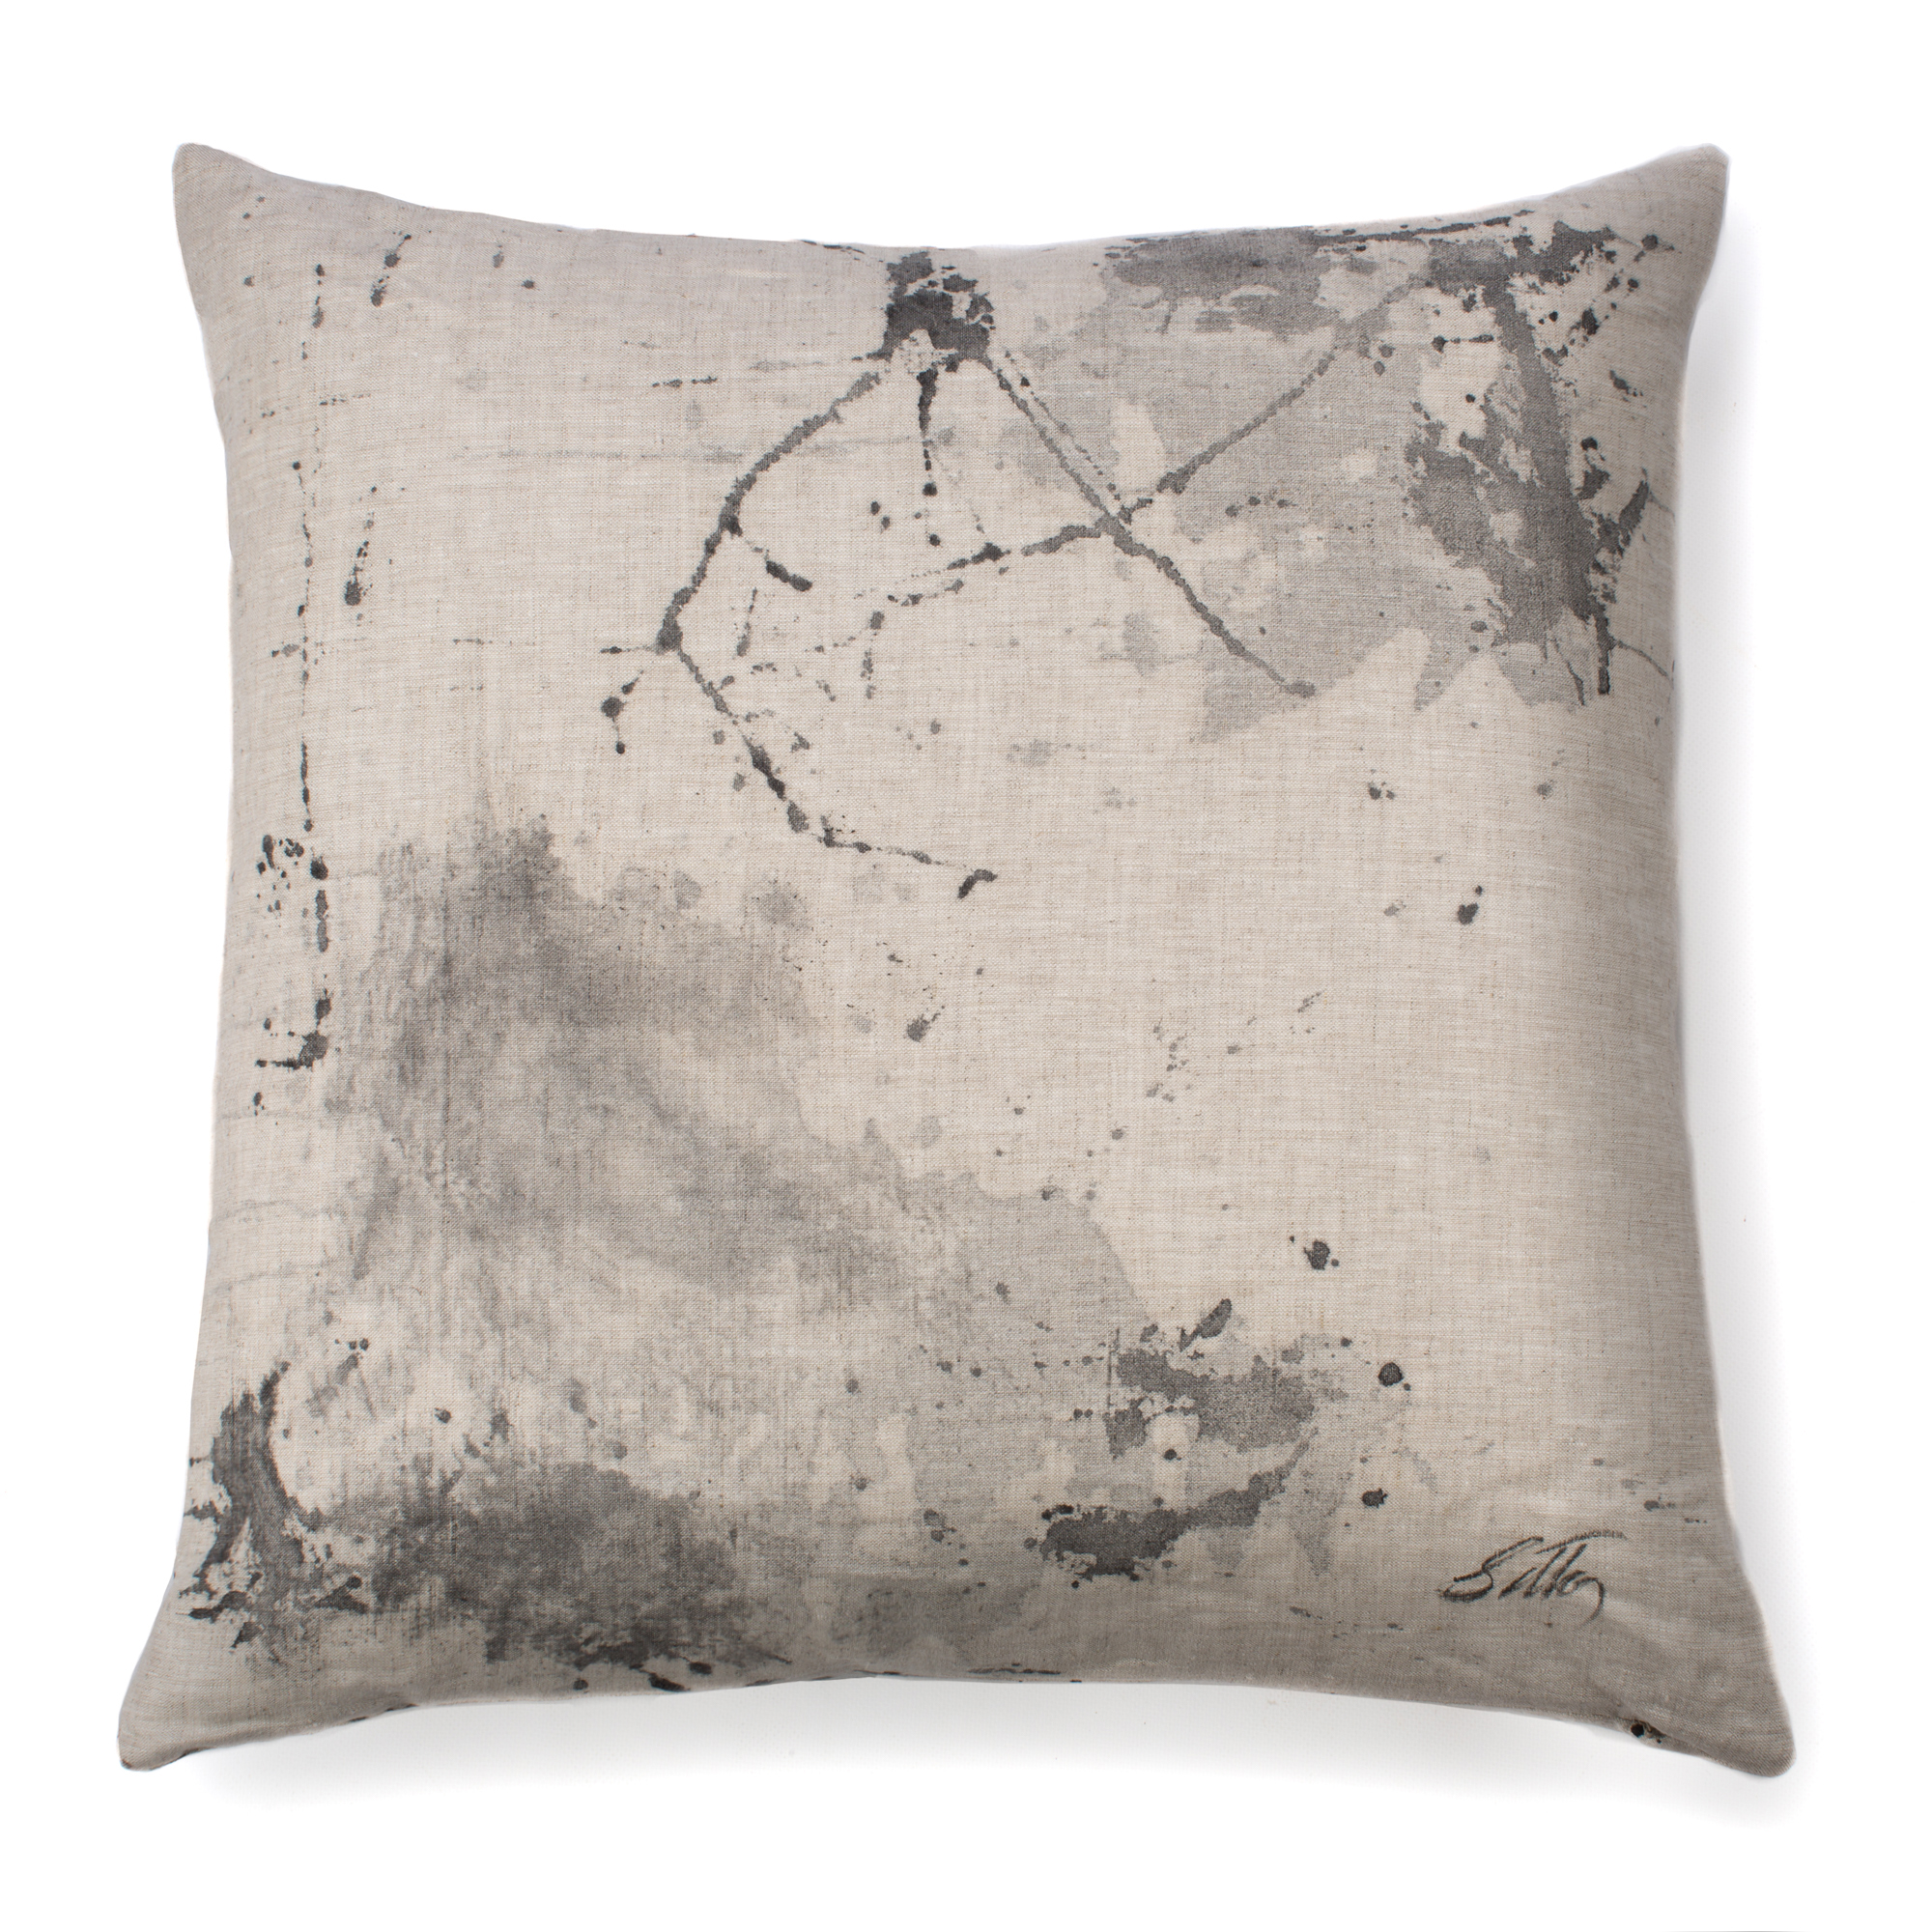 AbstractPillowFinished-2.jpg